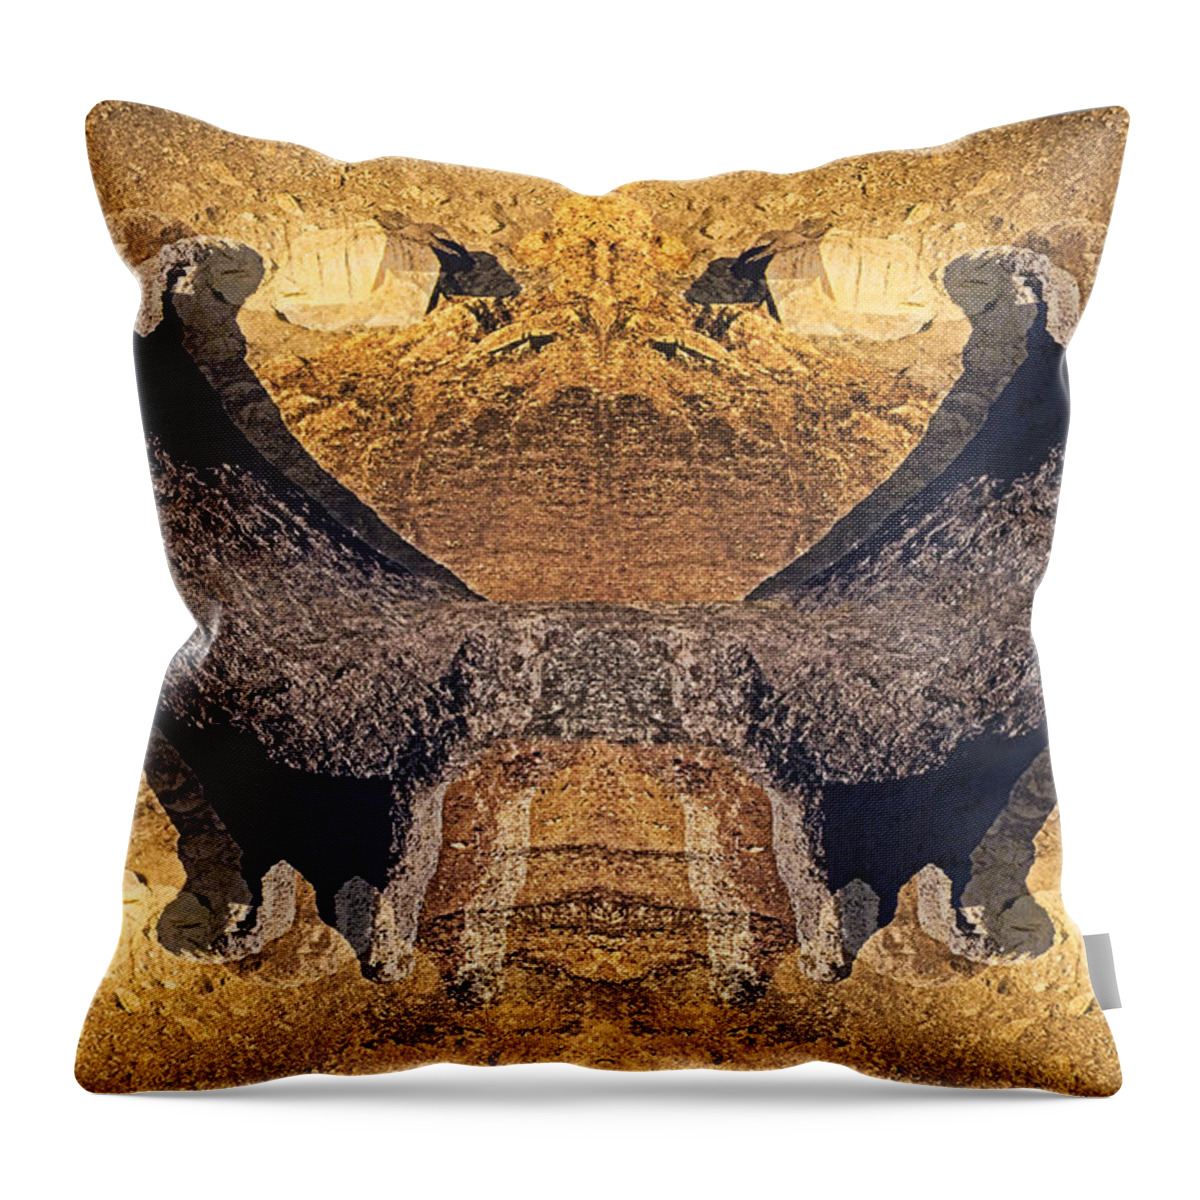 Rock Throne Throw Pillow featuring the digital art Gnome Rock Throne by Georgianne Giese